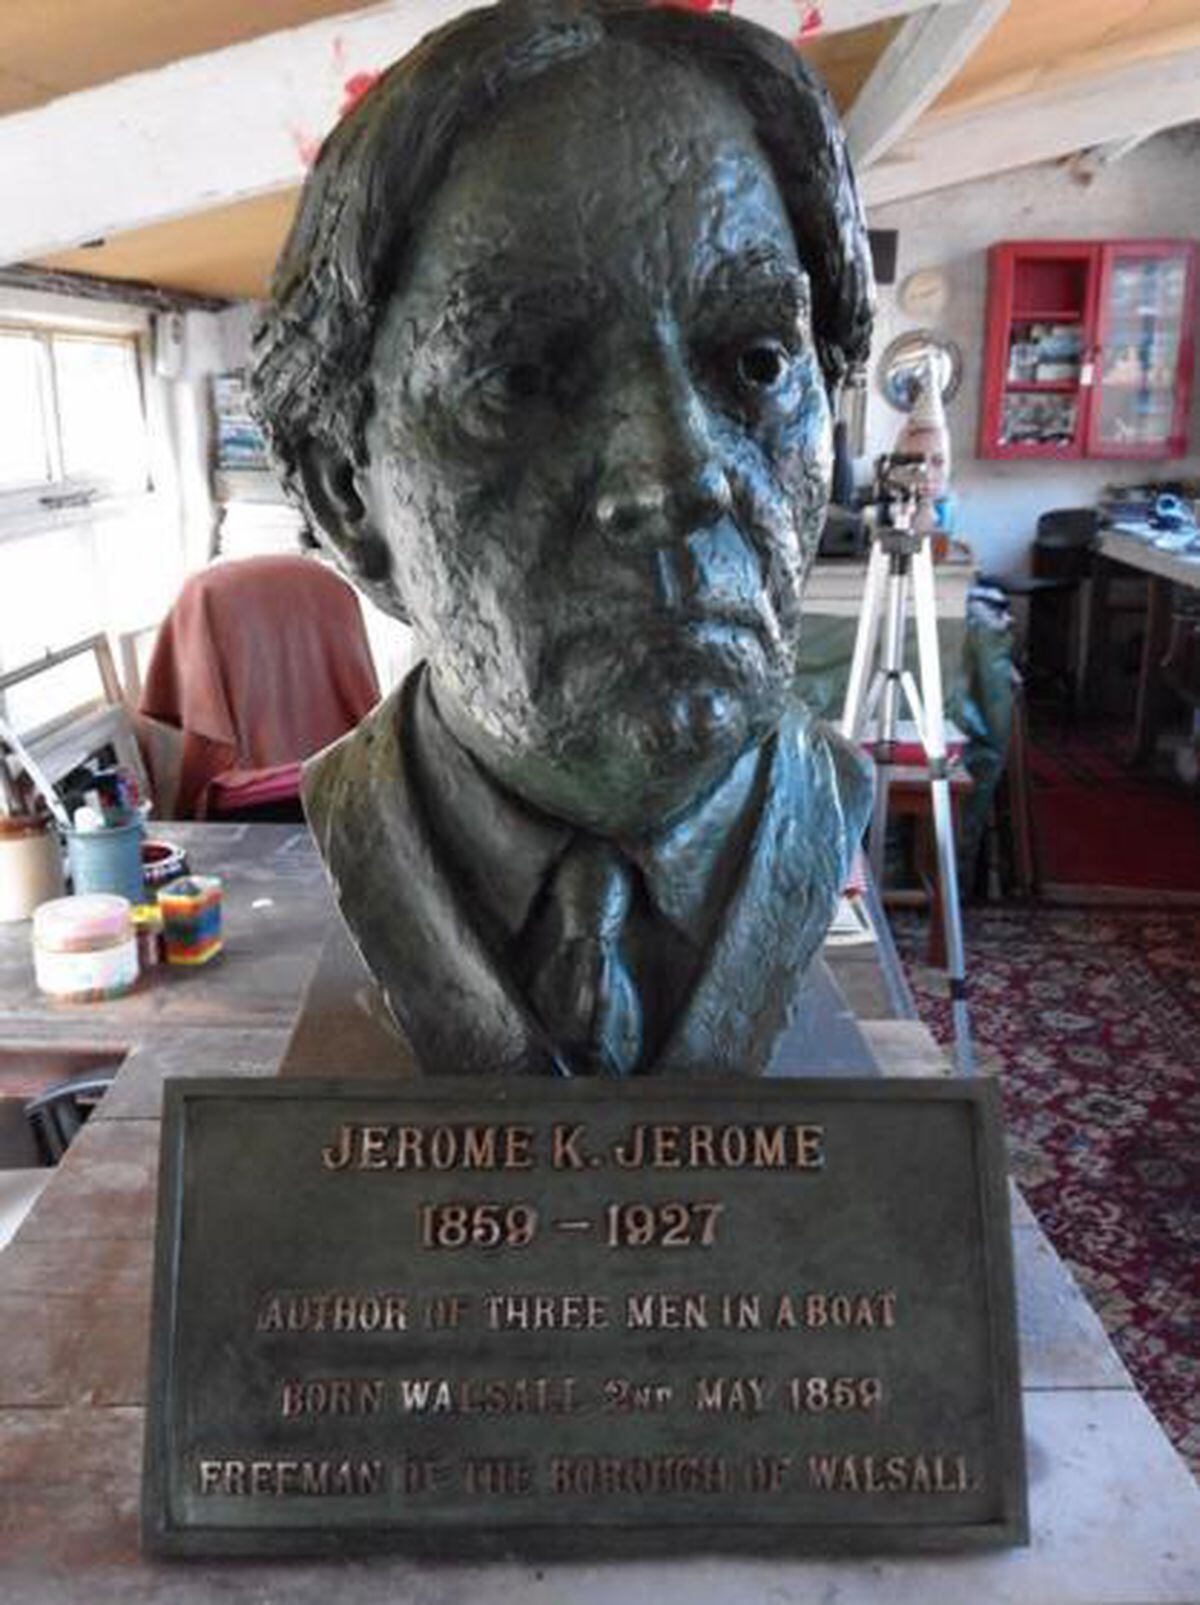 A bust of Jerome K Jerome, before it was installed at Walsall Arboretum